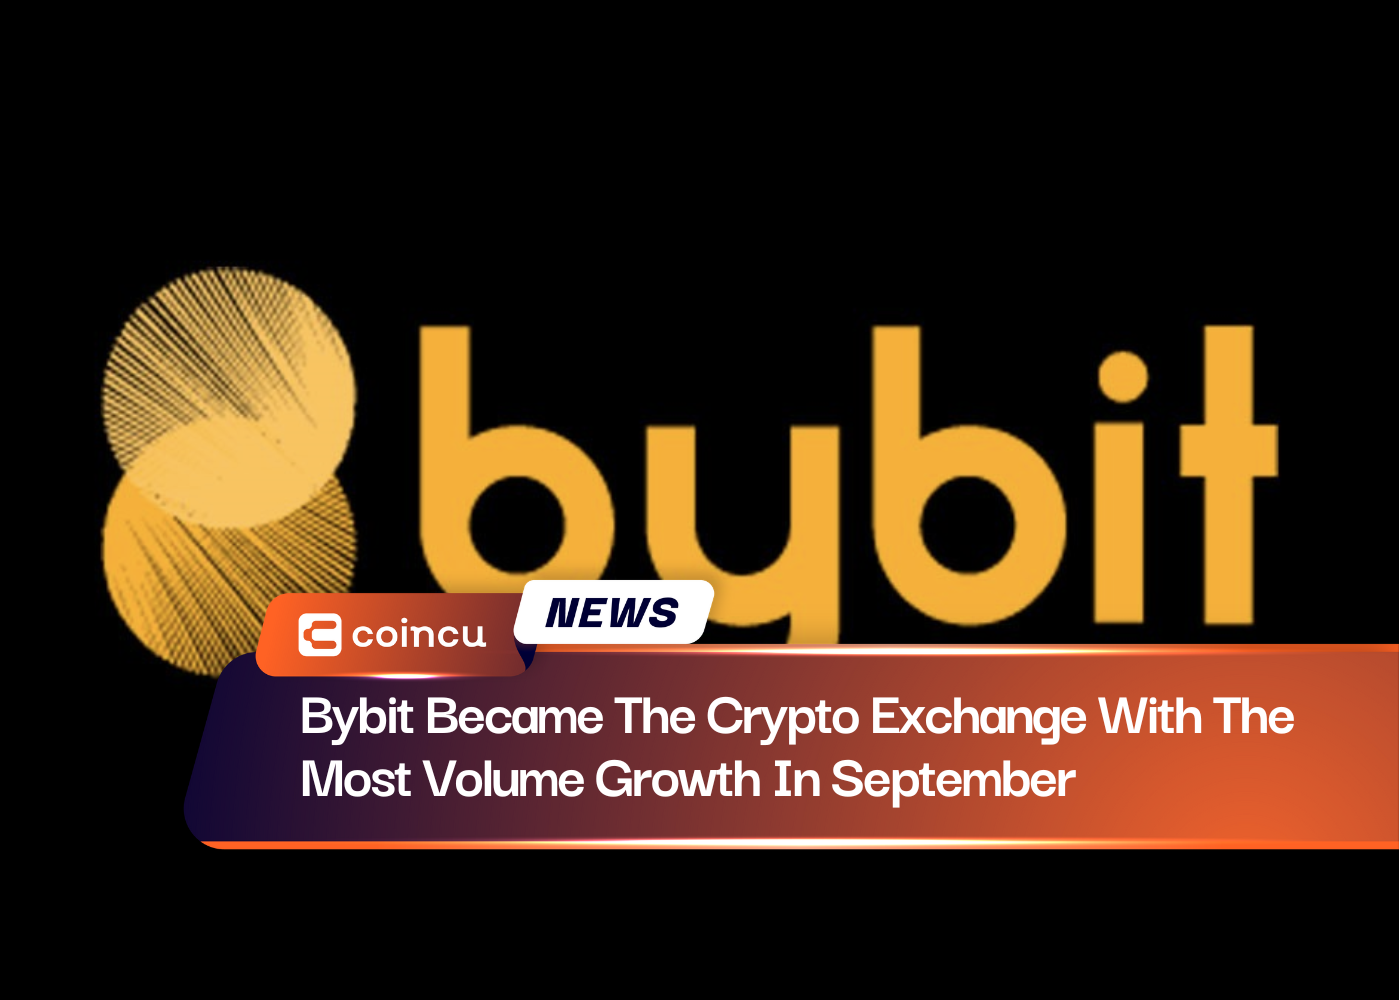 Bybit Became The Crypto Exchange With The Most Volume Growth In September